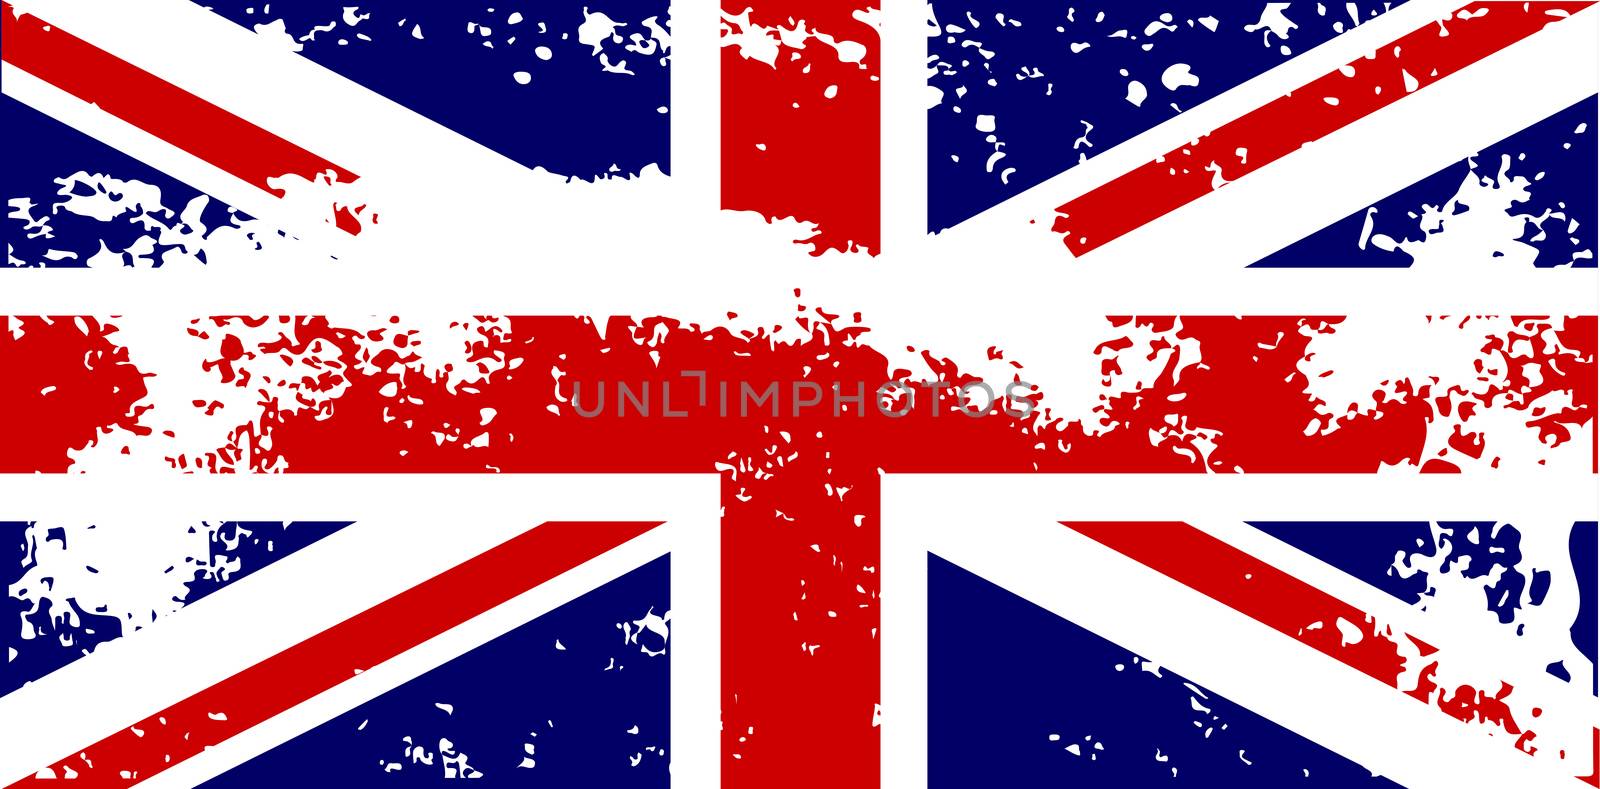 The British Union Jack flag with a heavy grunge effect.